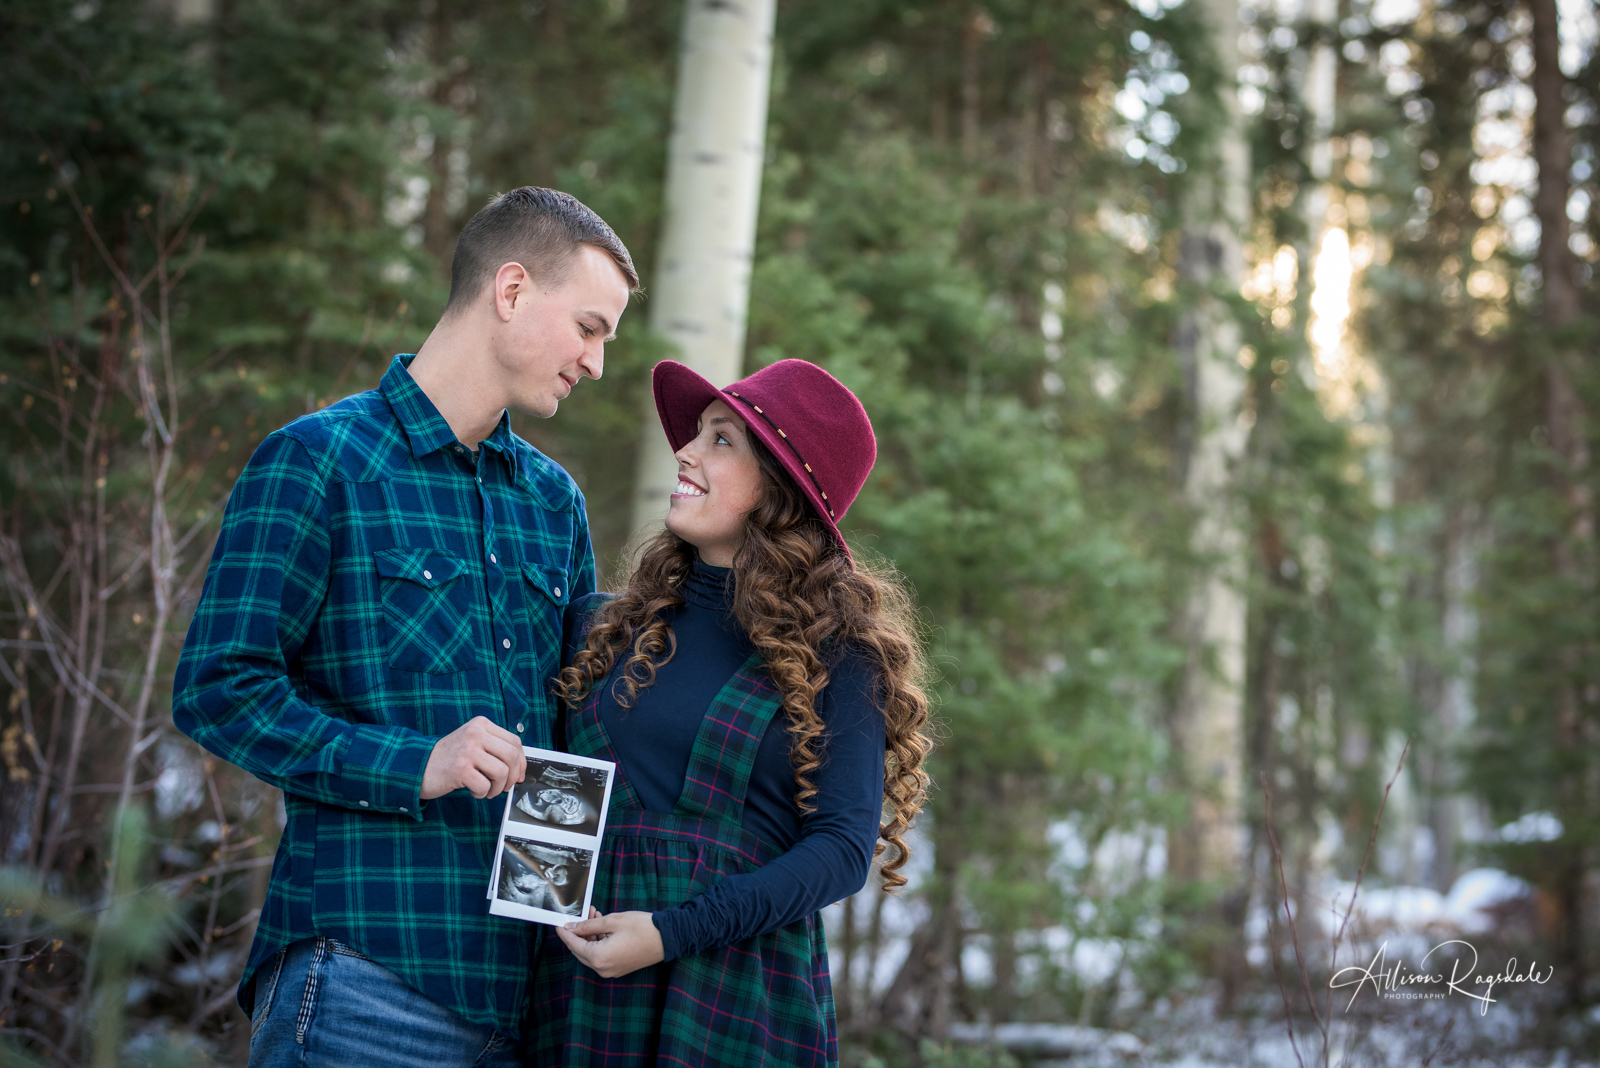 Allen Family Portraits and Baby Announcement Durango Colorado Photographed by Allison Ragsdale Photography In Winter Durango CO